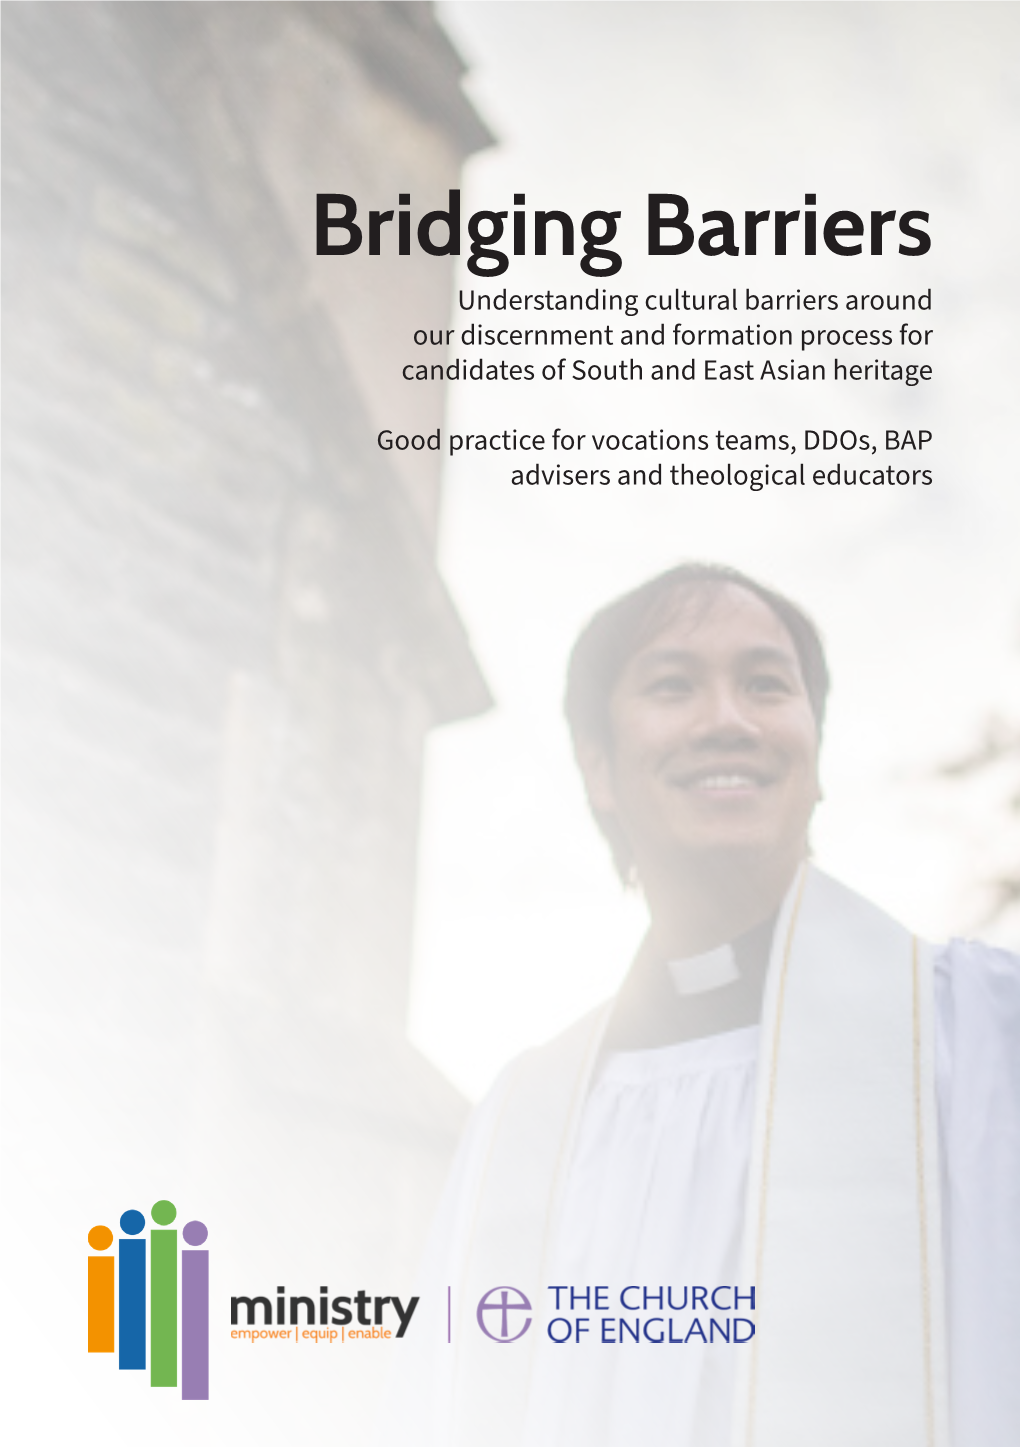 Bridging Barriers Understanding Cultural Barriers Around Our Discernment and Formation Process for Candidates of South and East Asian Heritage